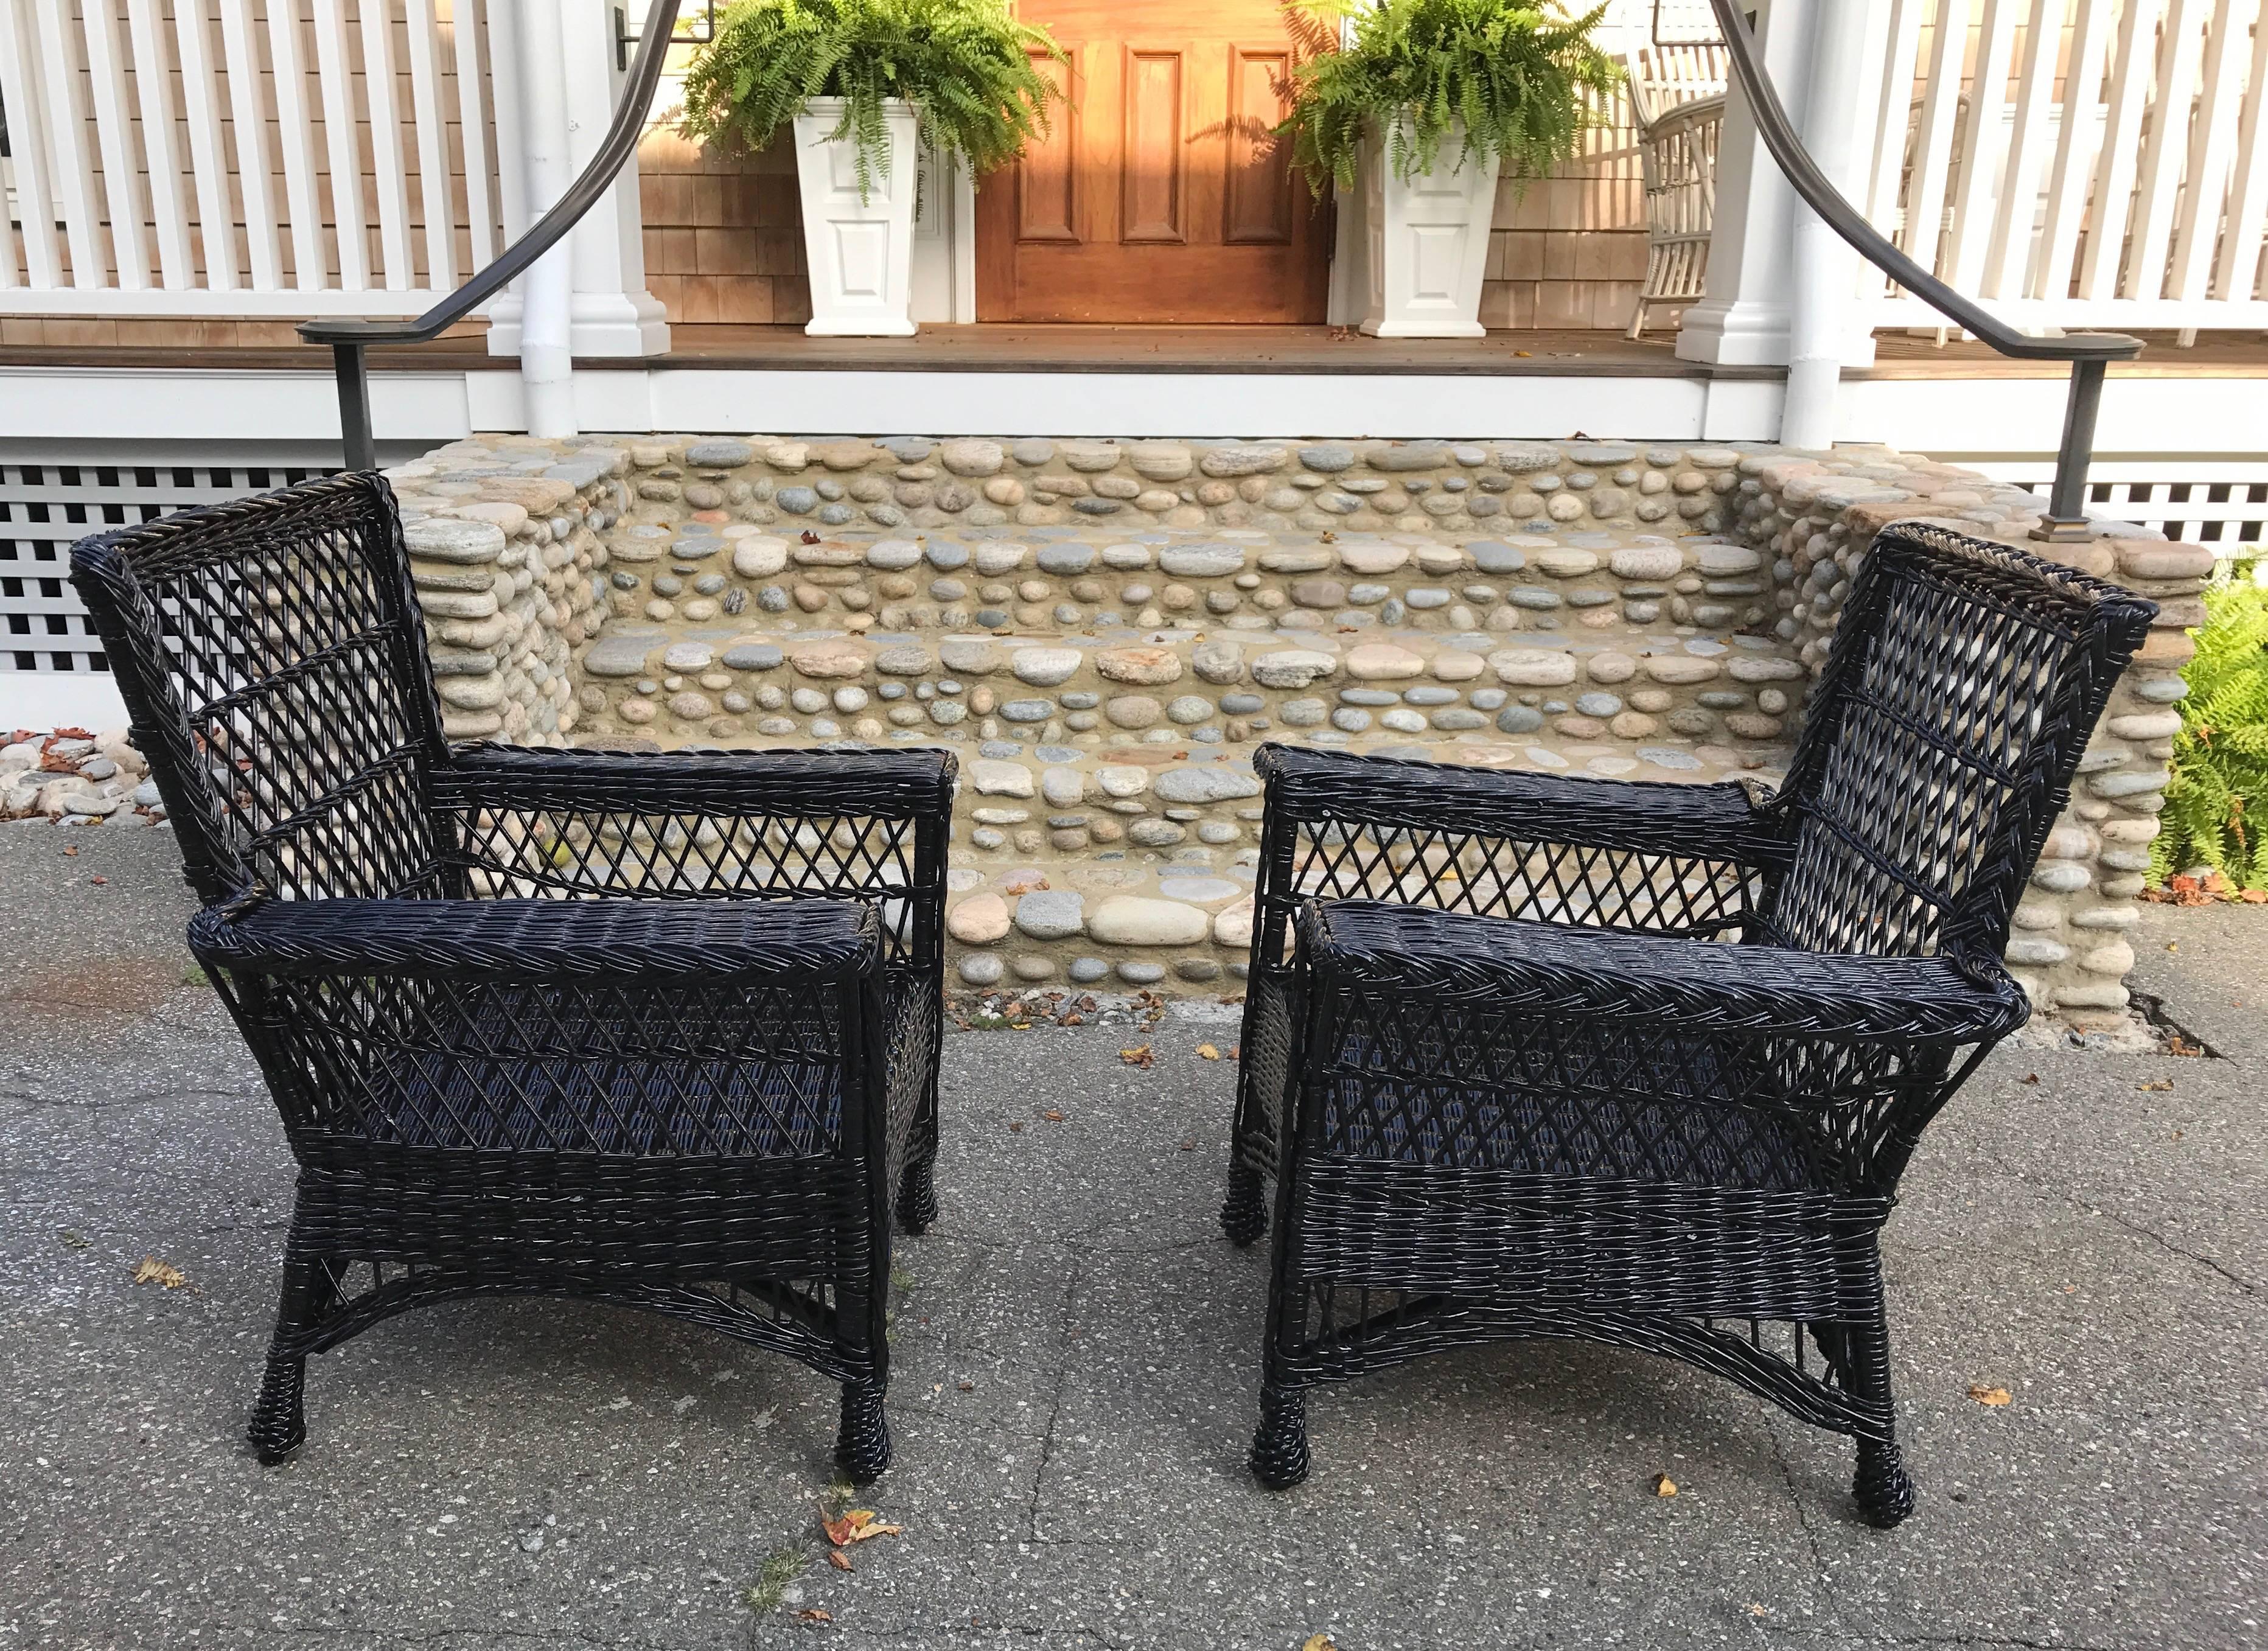 American Antique Bar Harbor Wicker Willow Chairs